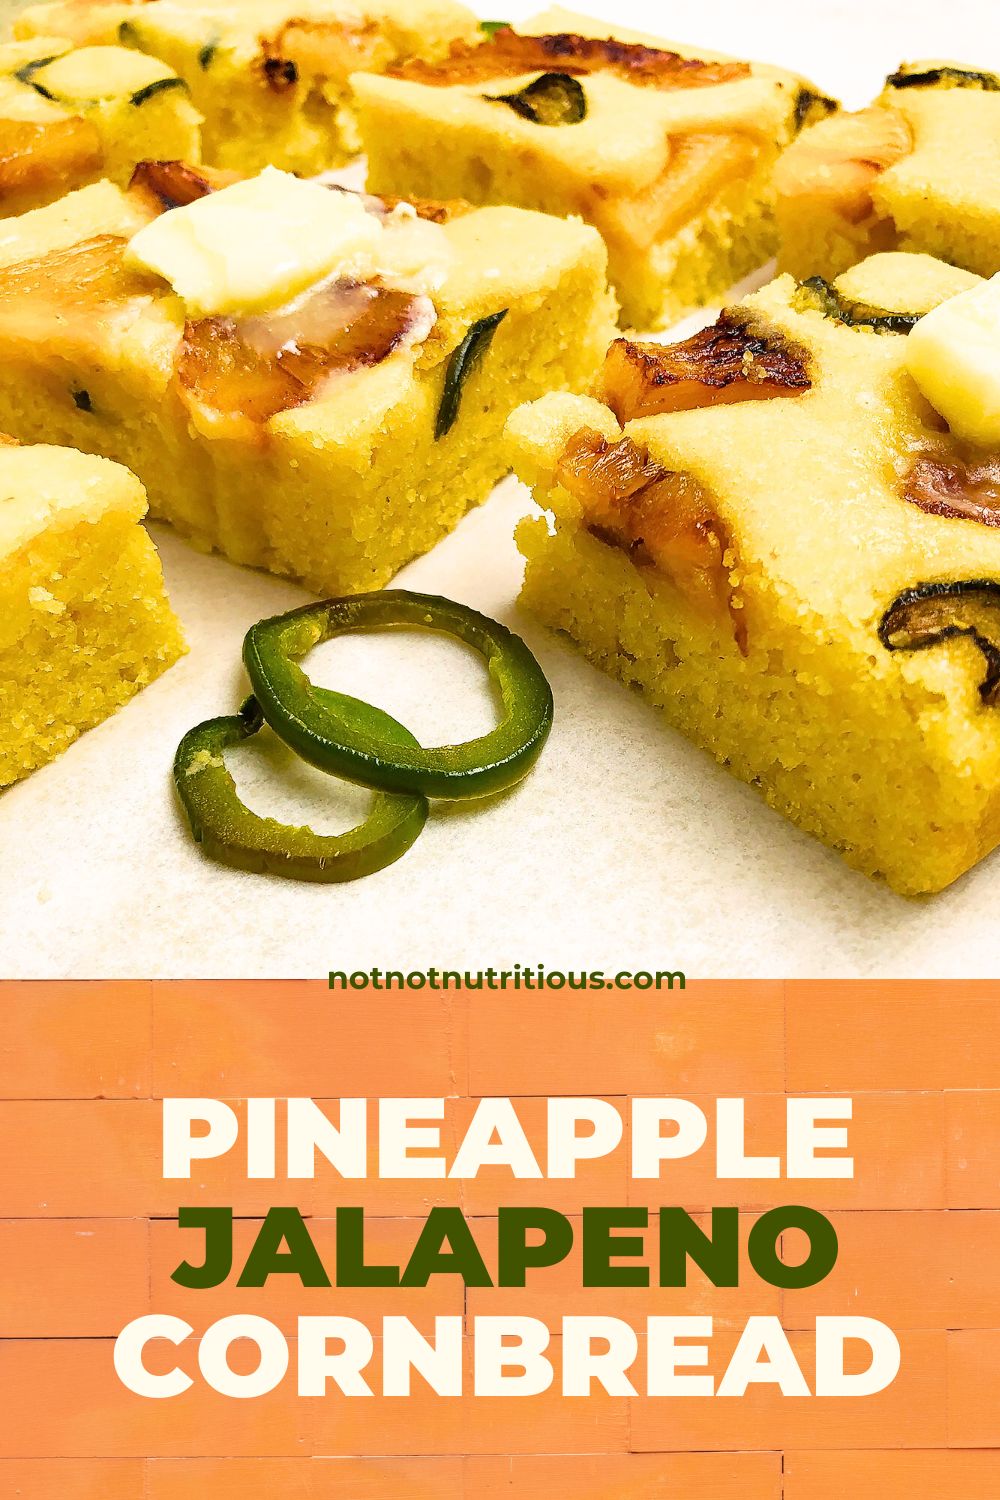 Pin with a close up, side view of Pineapple Jalapeno Cornbread